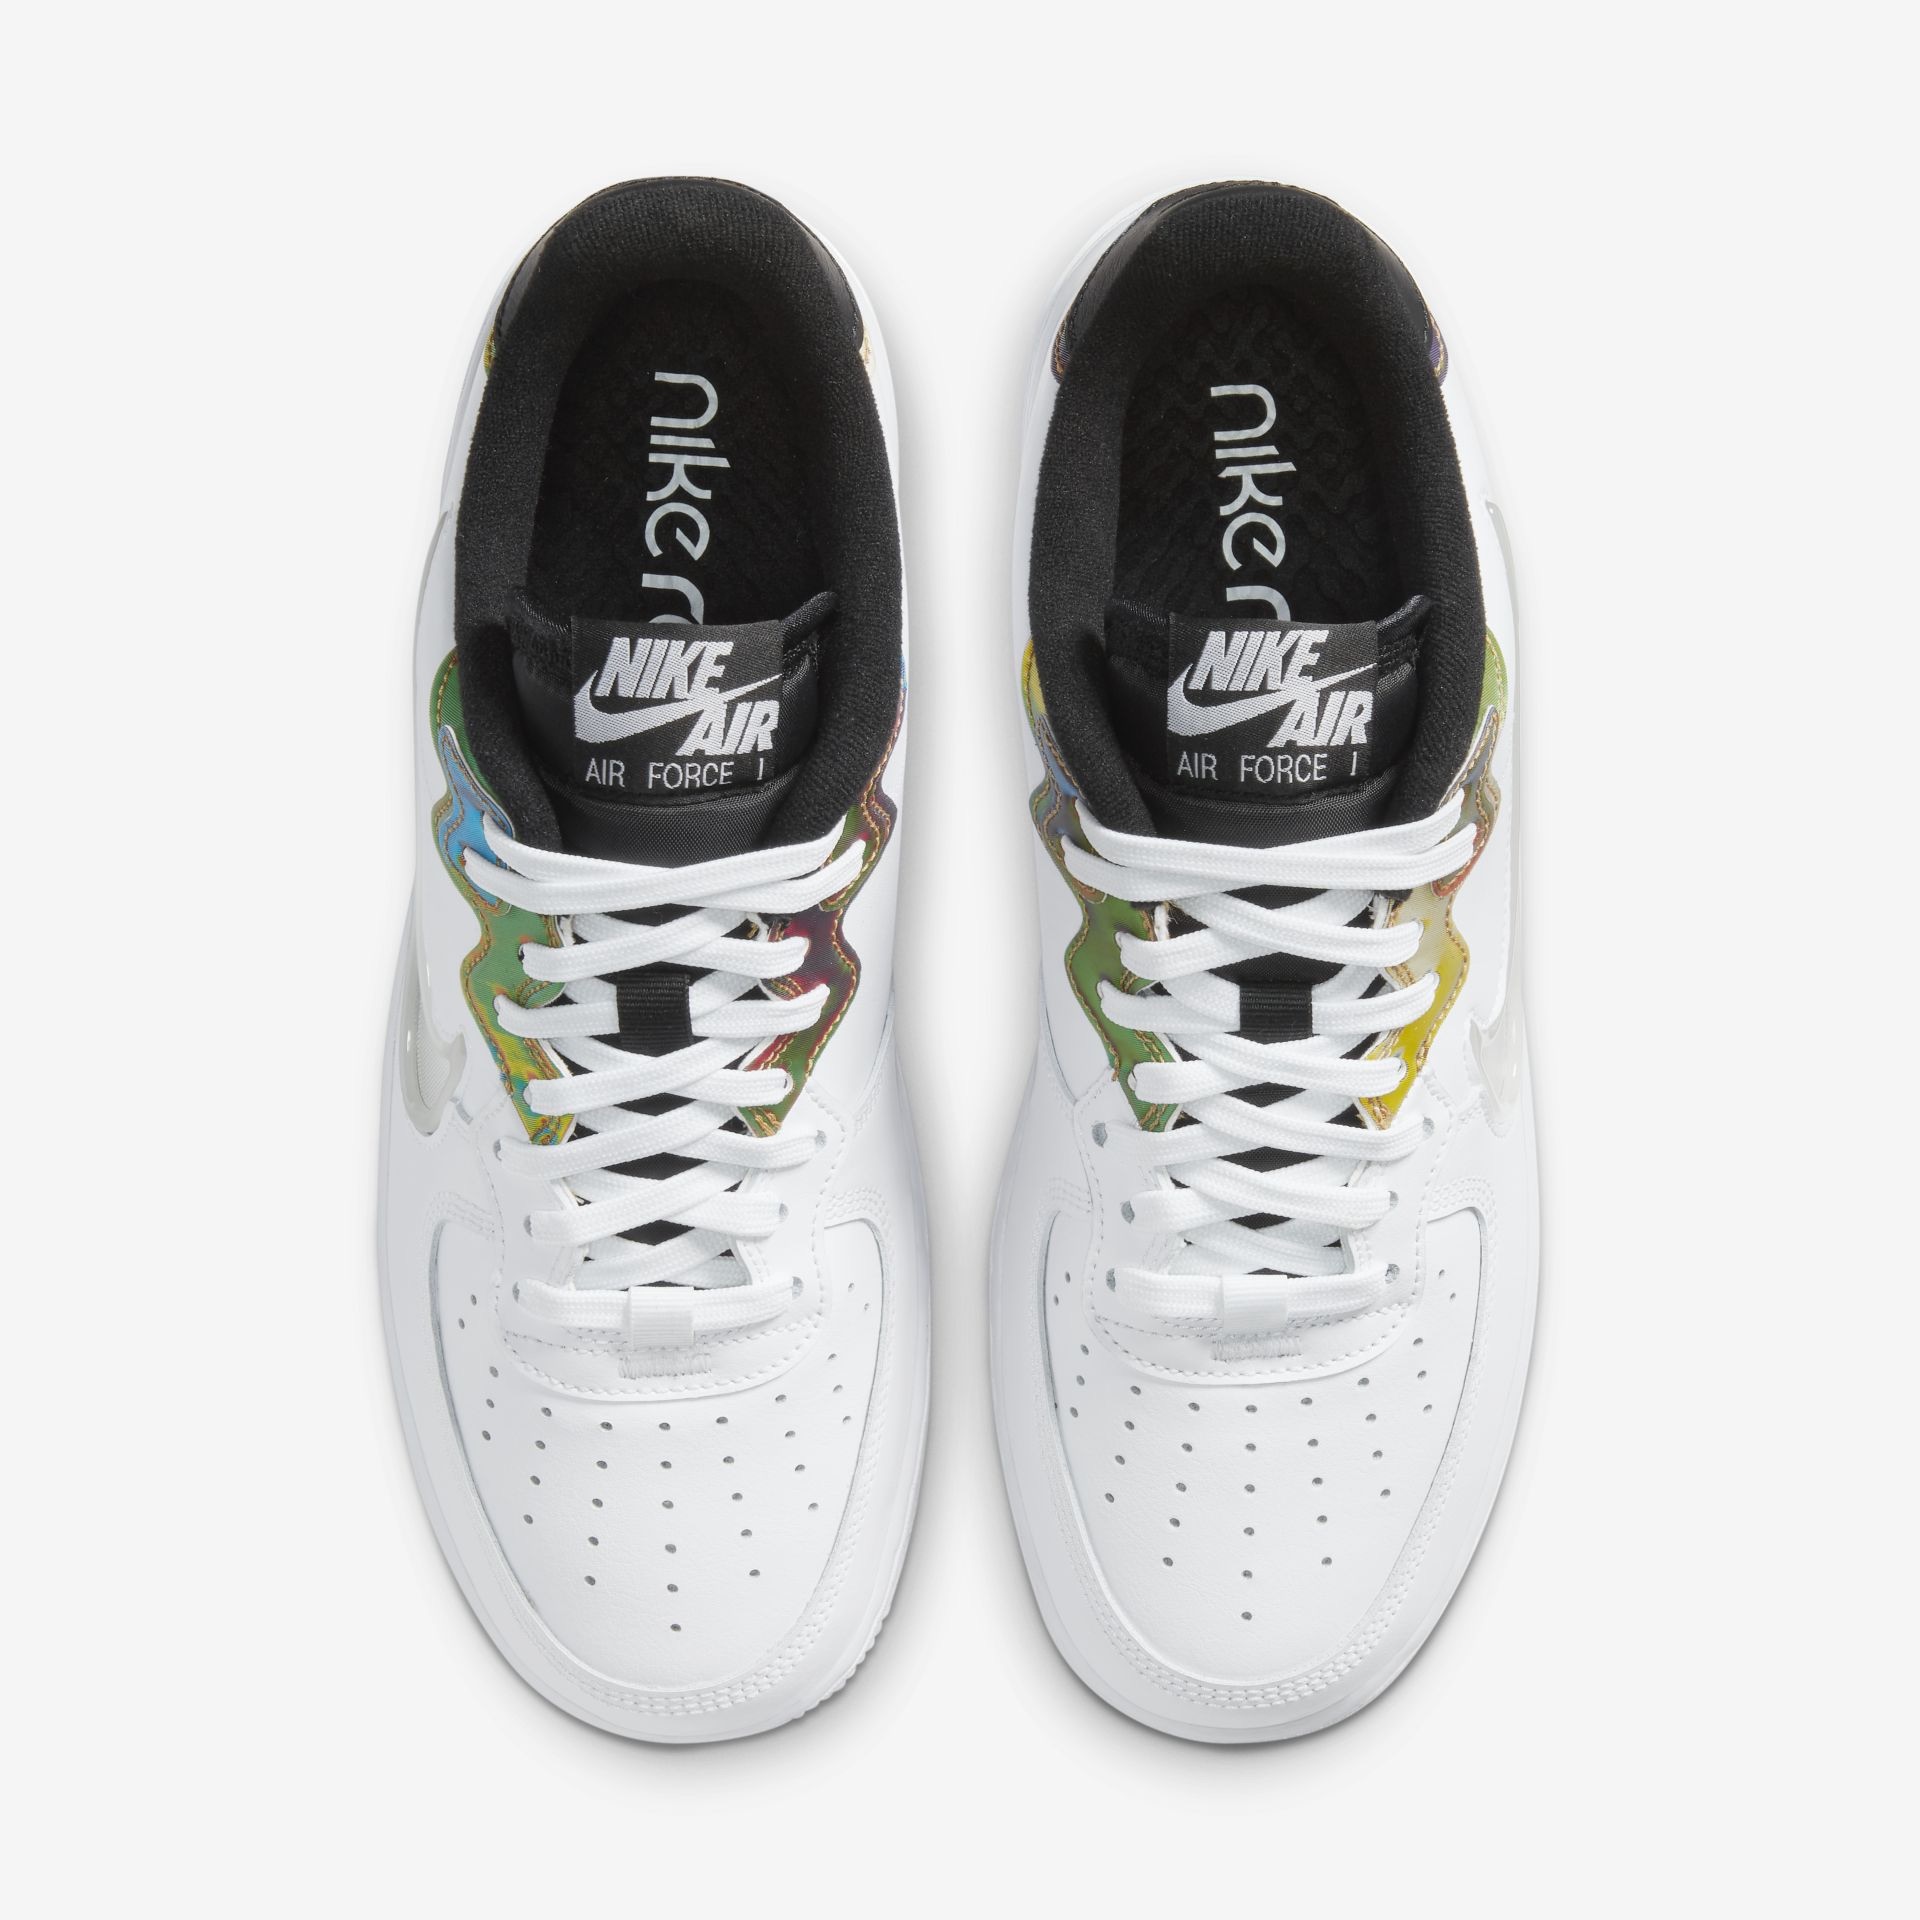 J23 iPhone App on X: GOOD LUCK! Louis Vuitton and Nike “Air Force